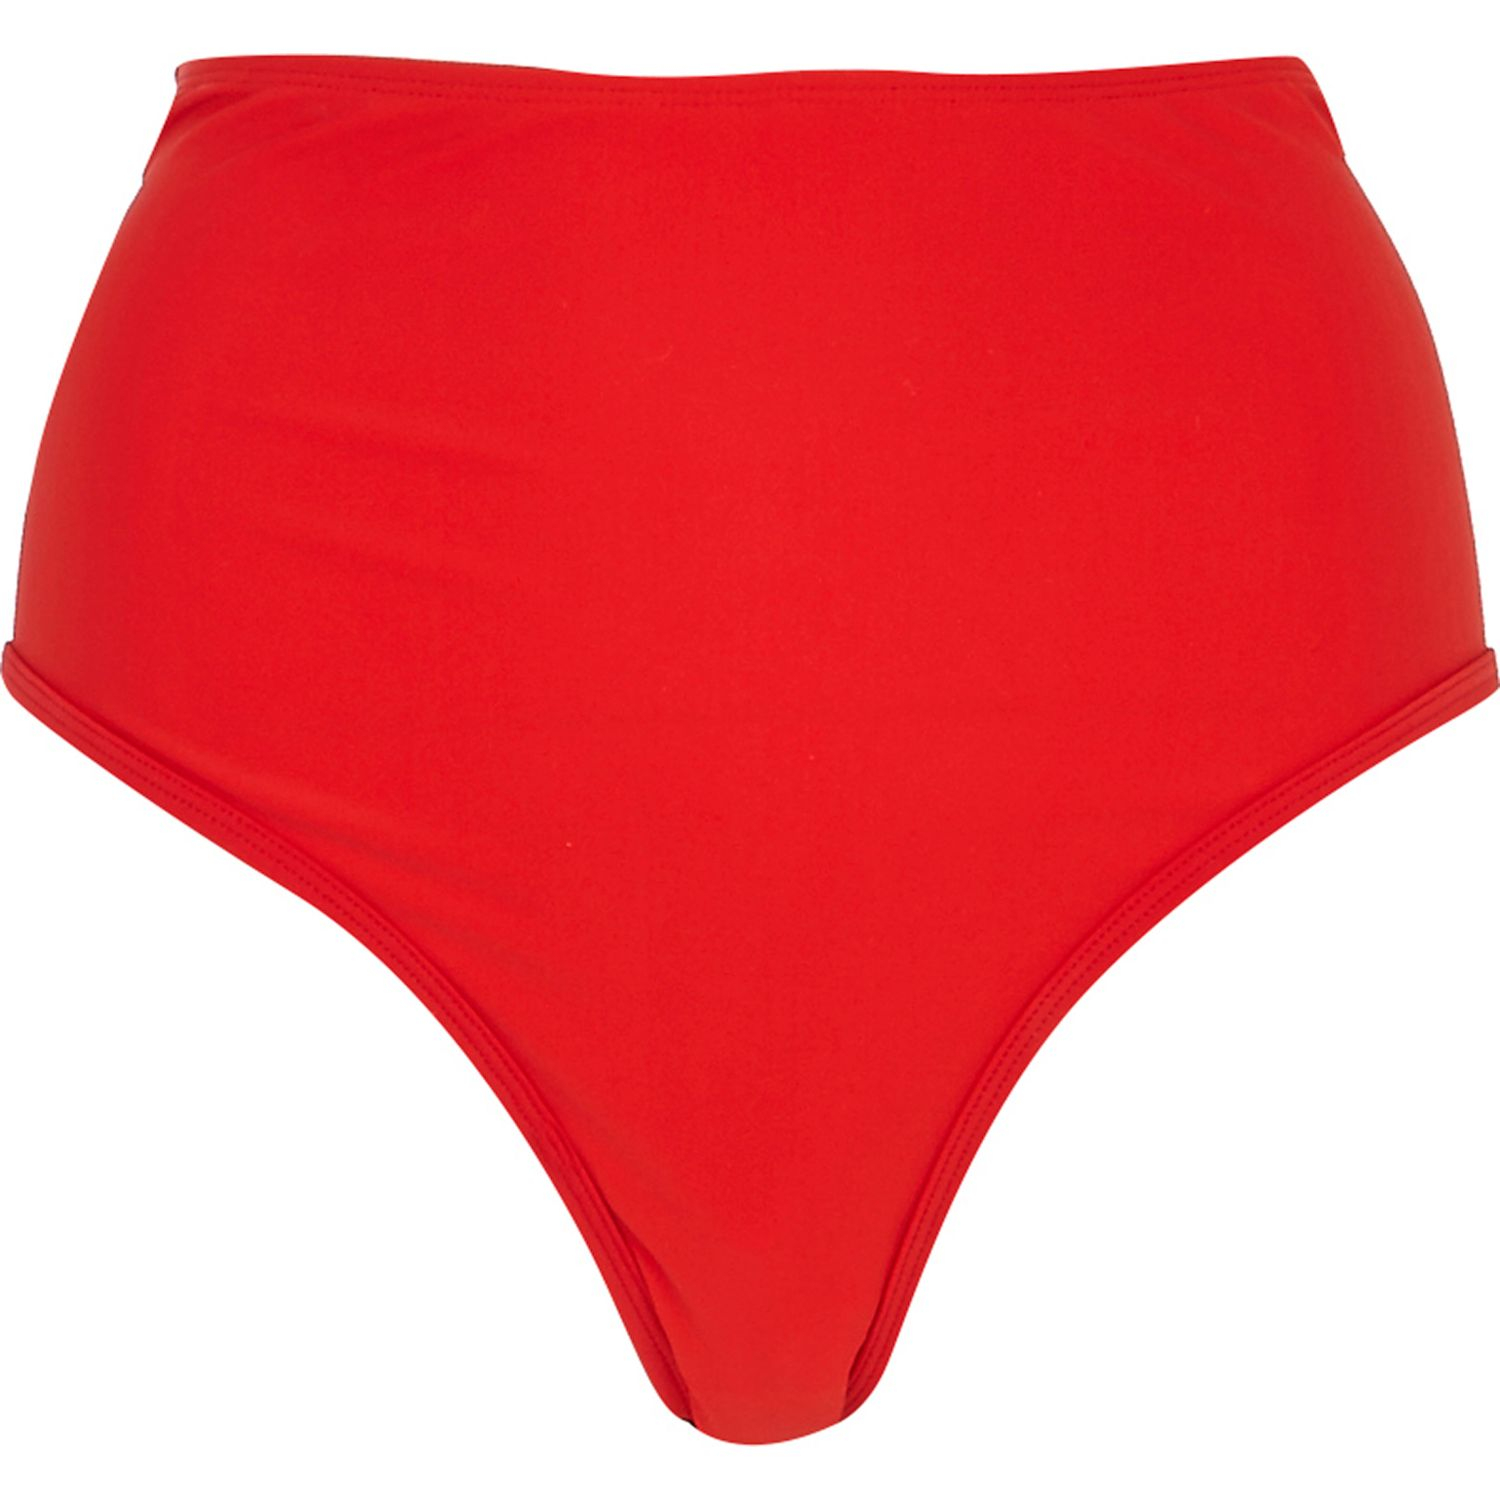 River Island Red Katie Eary High Waisted Bikini Bottoms In Red Lyst 